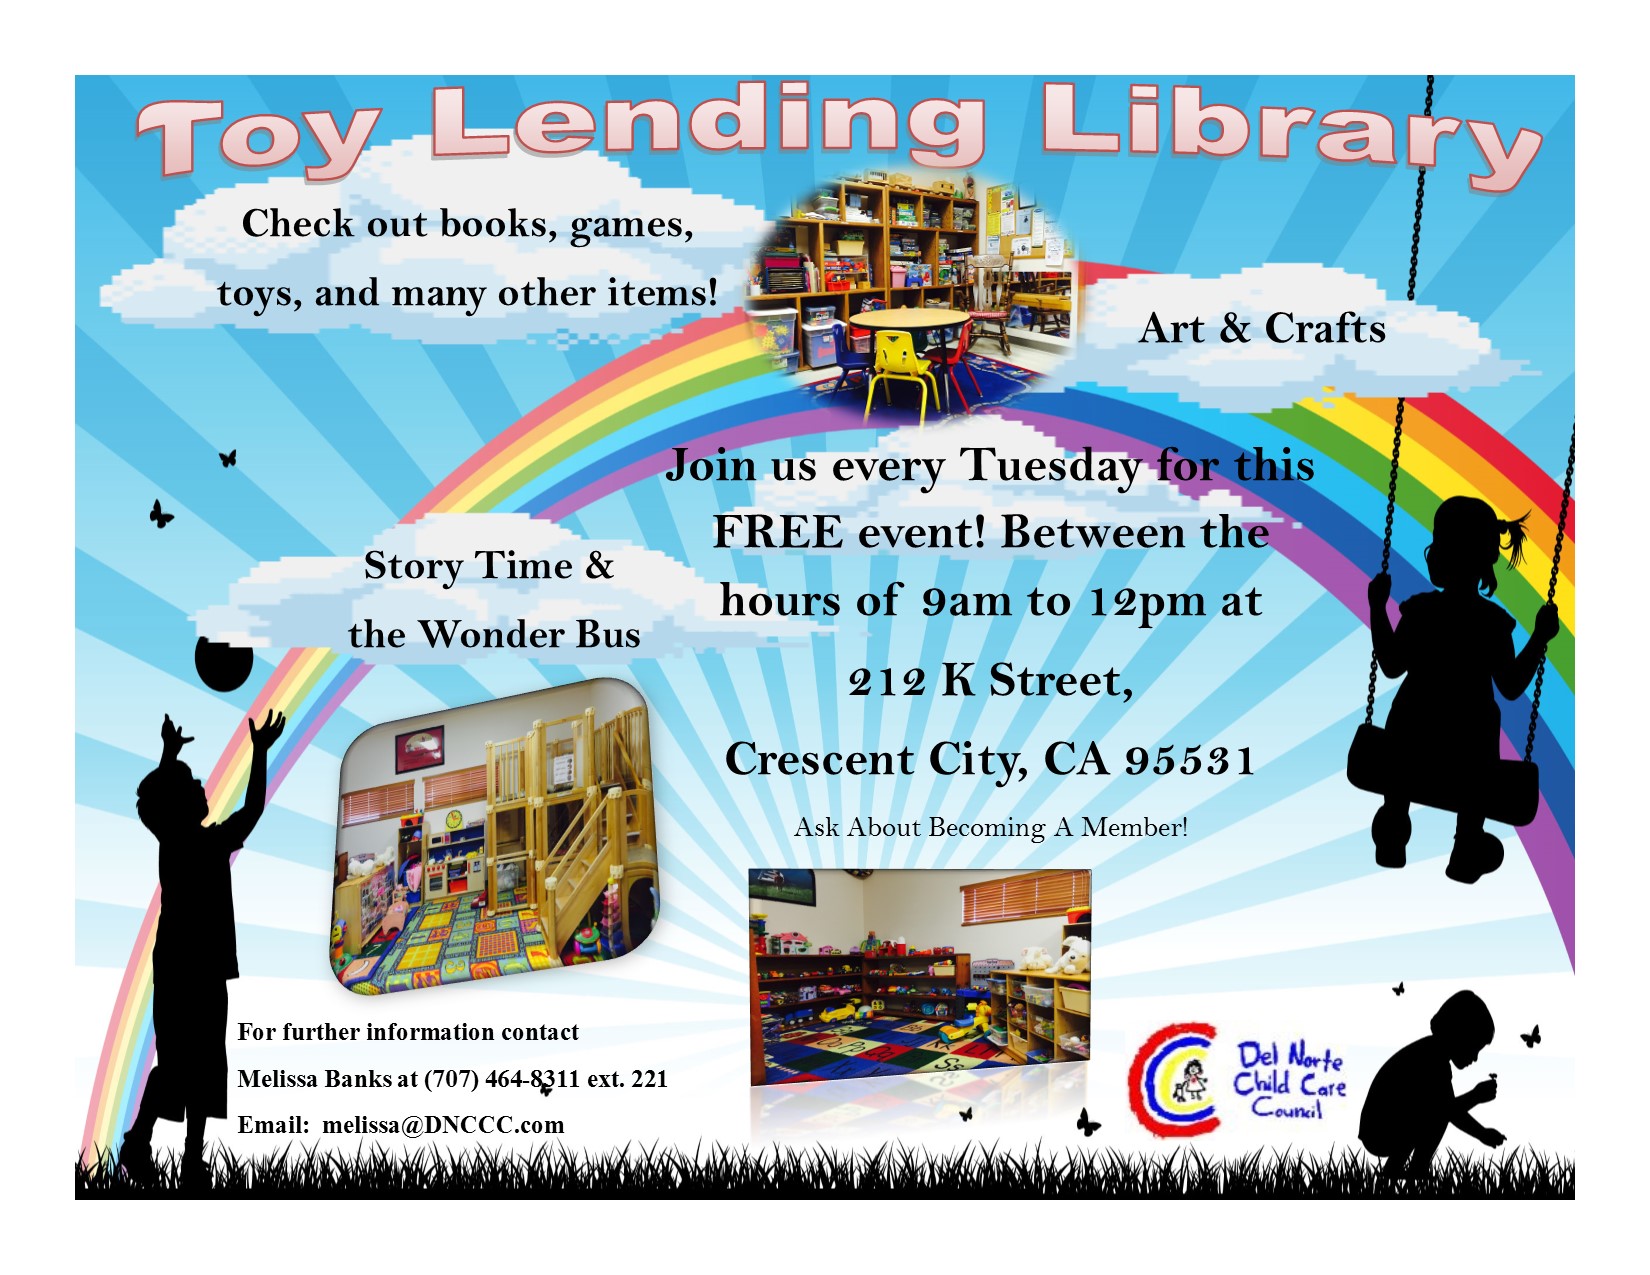 Toy Lending Library Del Norte Child